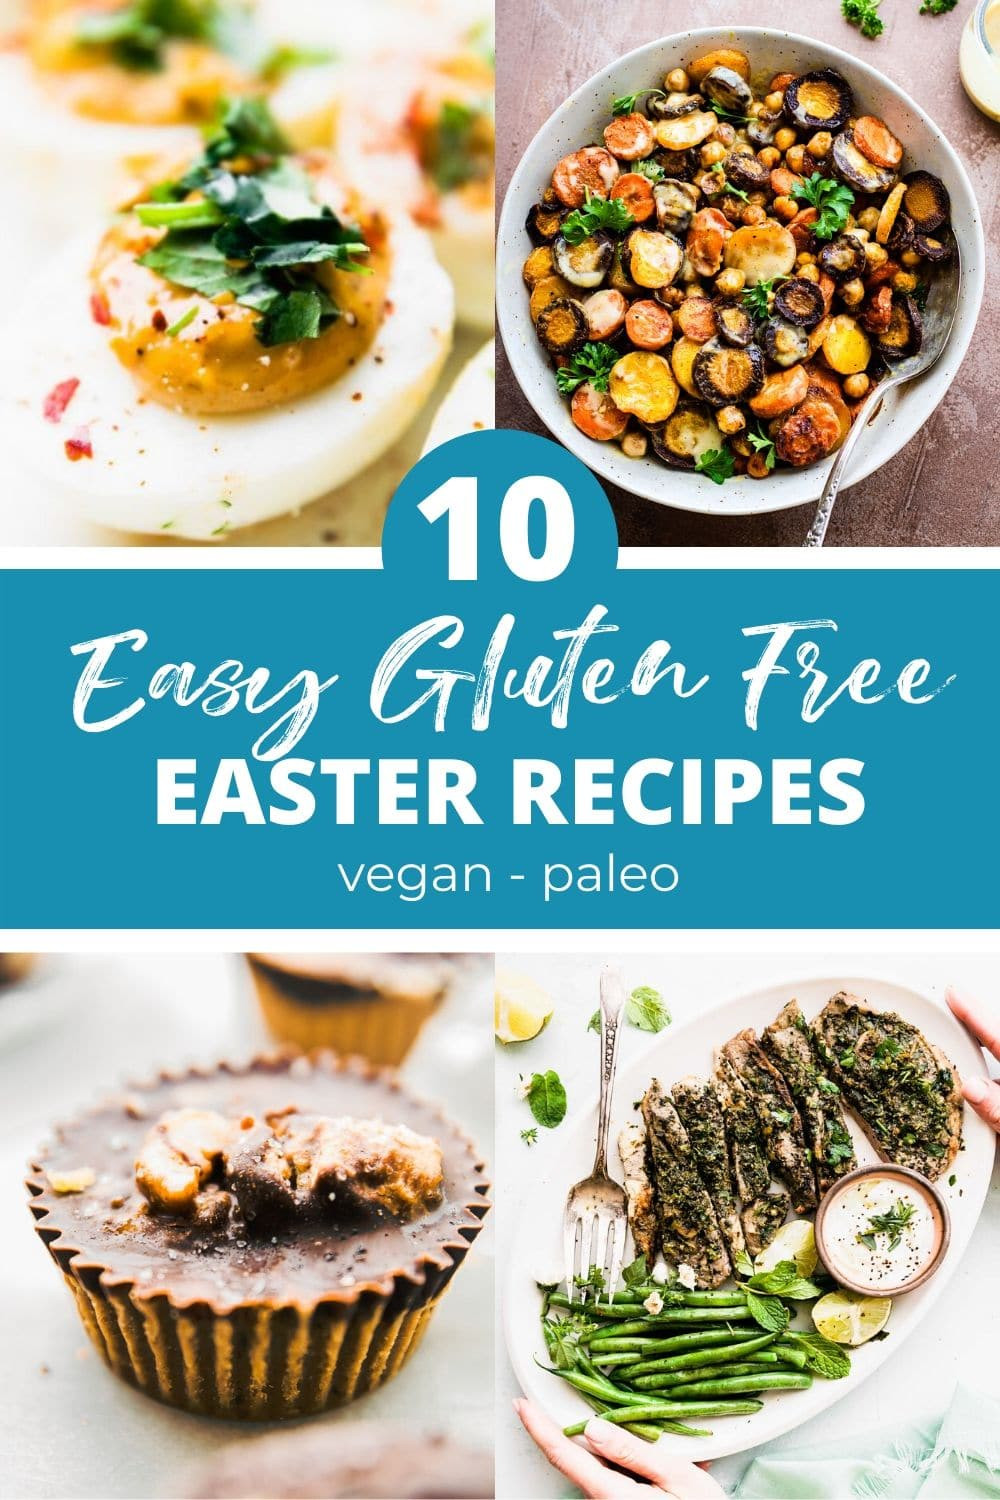 Gluten Free Easter Recipes
 Easy Gluten Free Easter Recipes